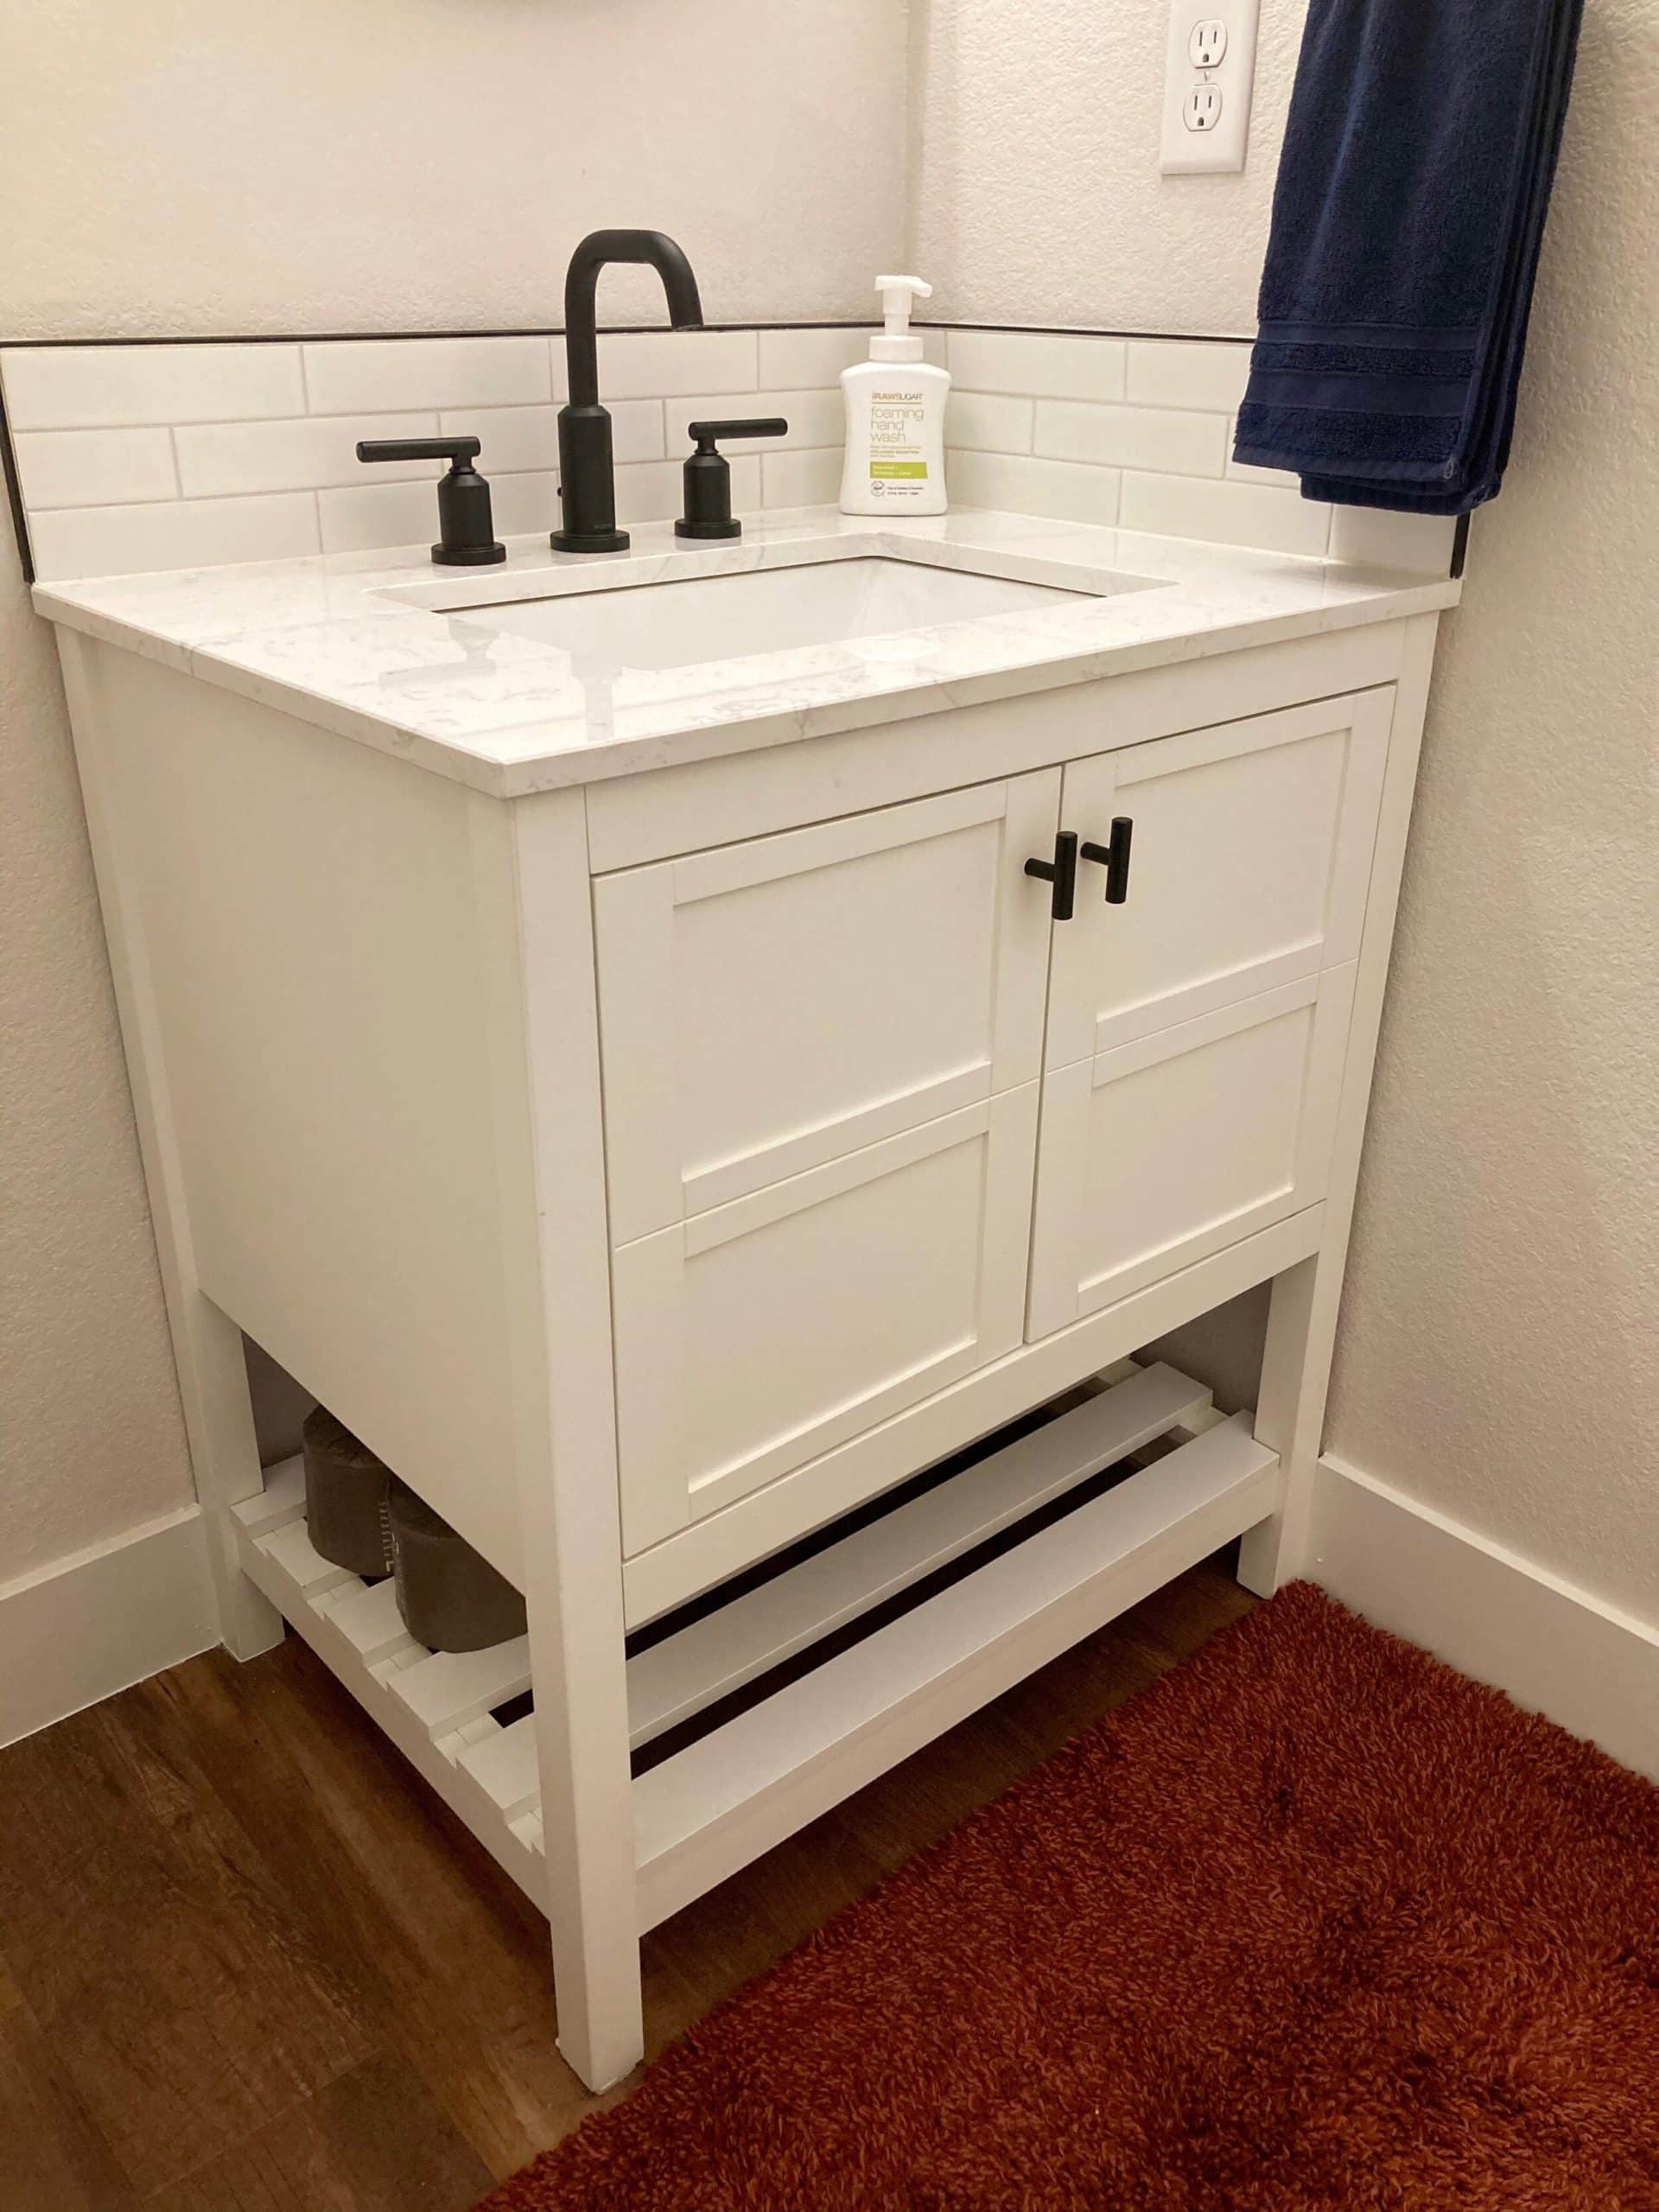 Half bathroom vanity with white subway tile and black faucet